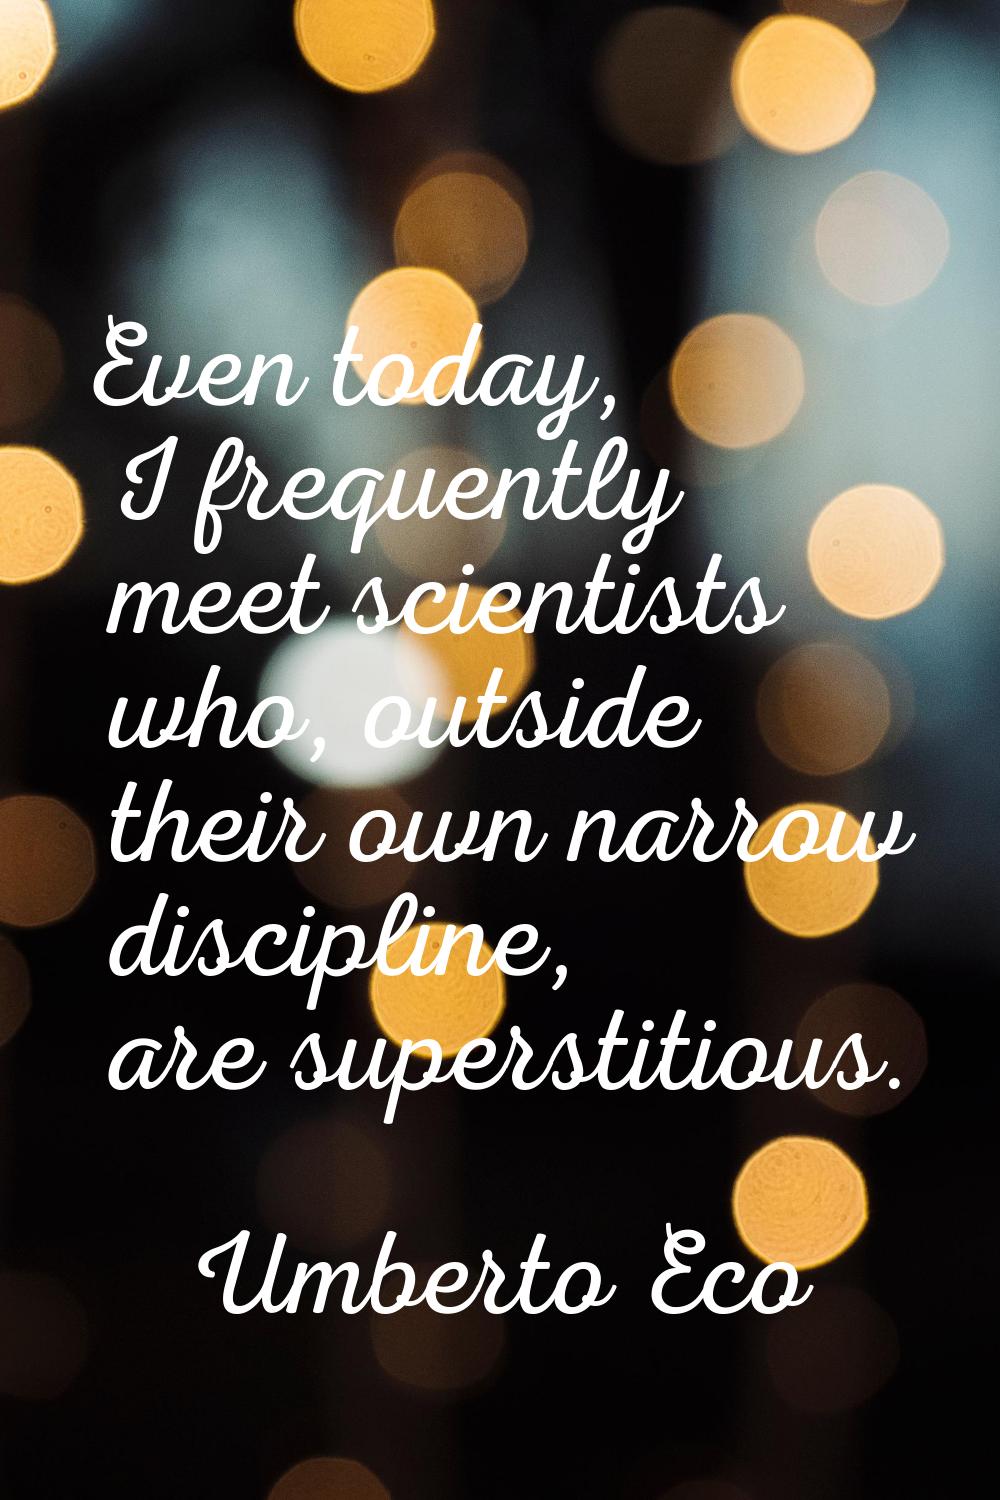 Even today, I frequently meet scientists who, outside their own narrow discipline, are superstitiou